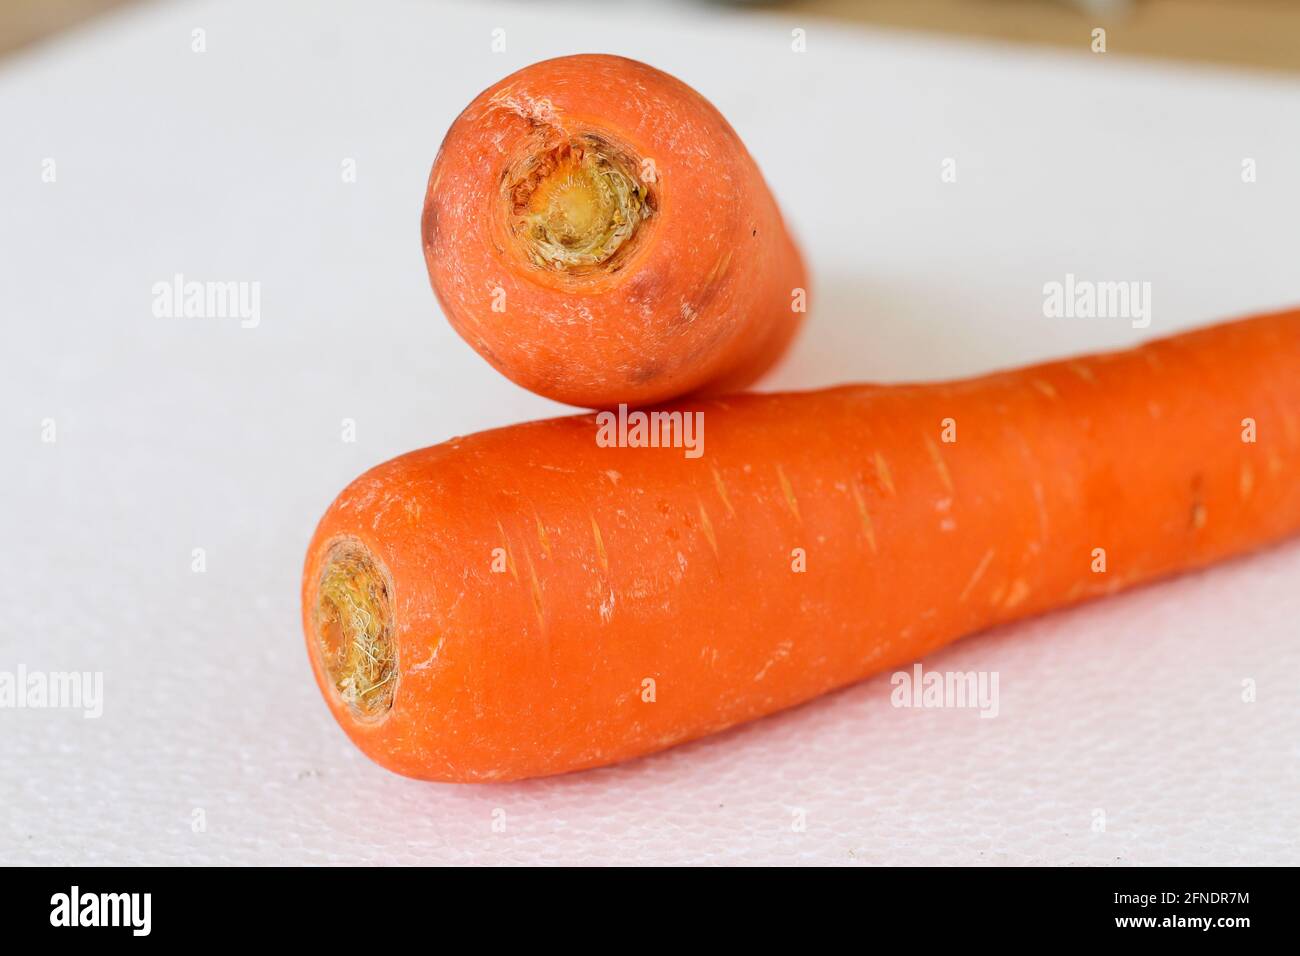 two carrots on white background which one on top Stock Photo